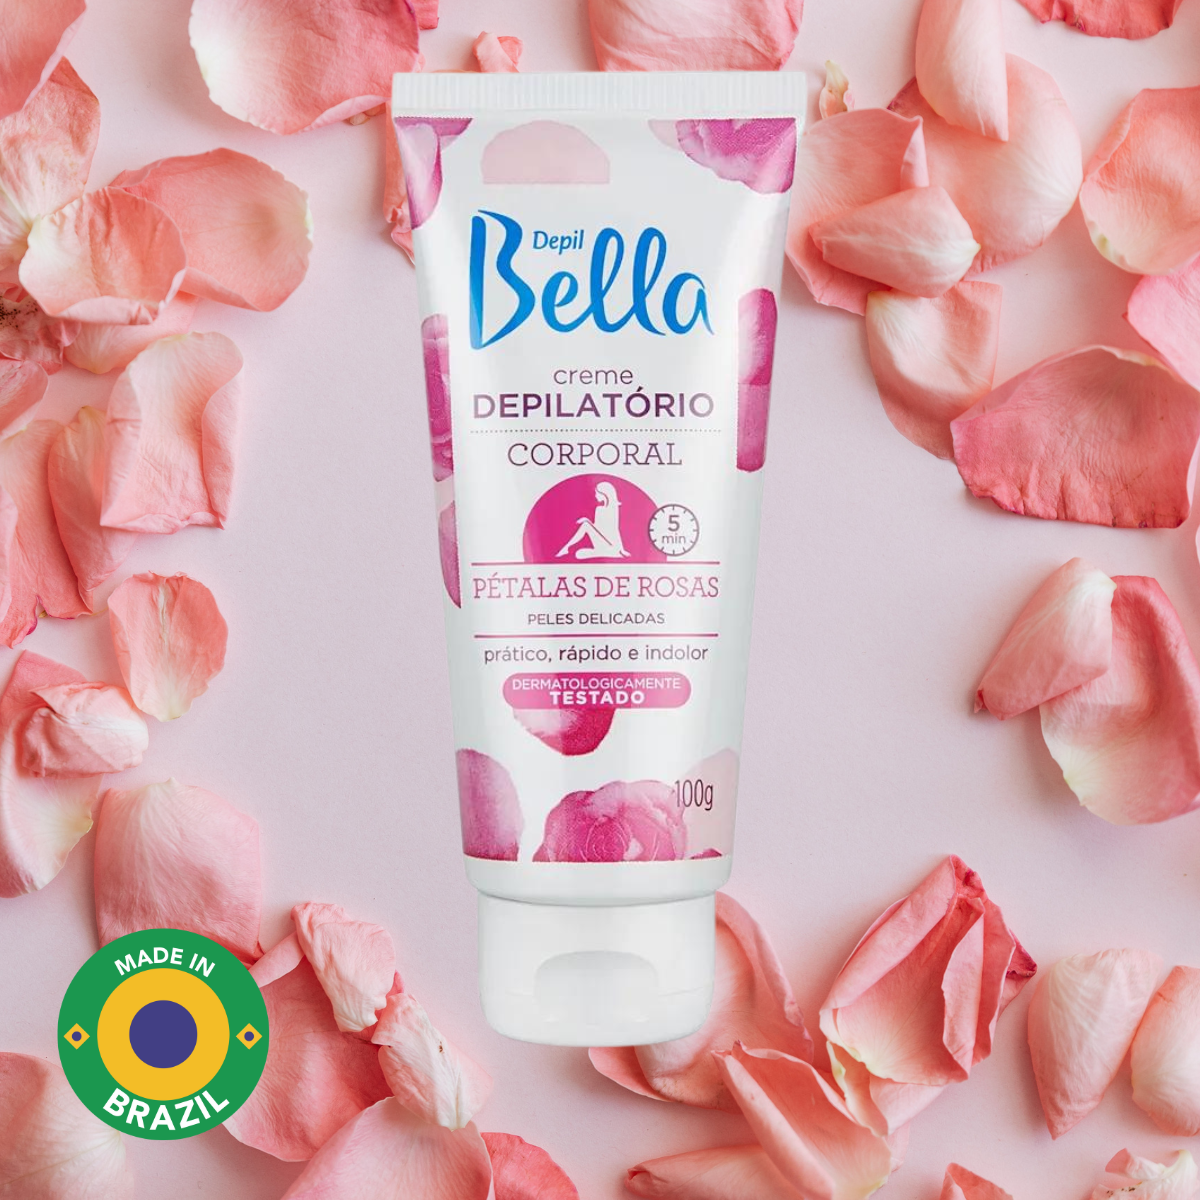 Depil Bella Rose Petals Body Hair Removal Cream – With Argan Oil and Shea Butter, Quick and Gentle Formula for Delicate Skin, 100g